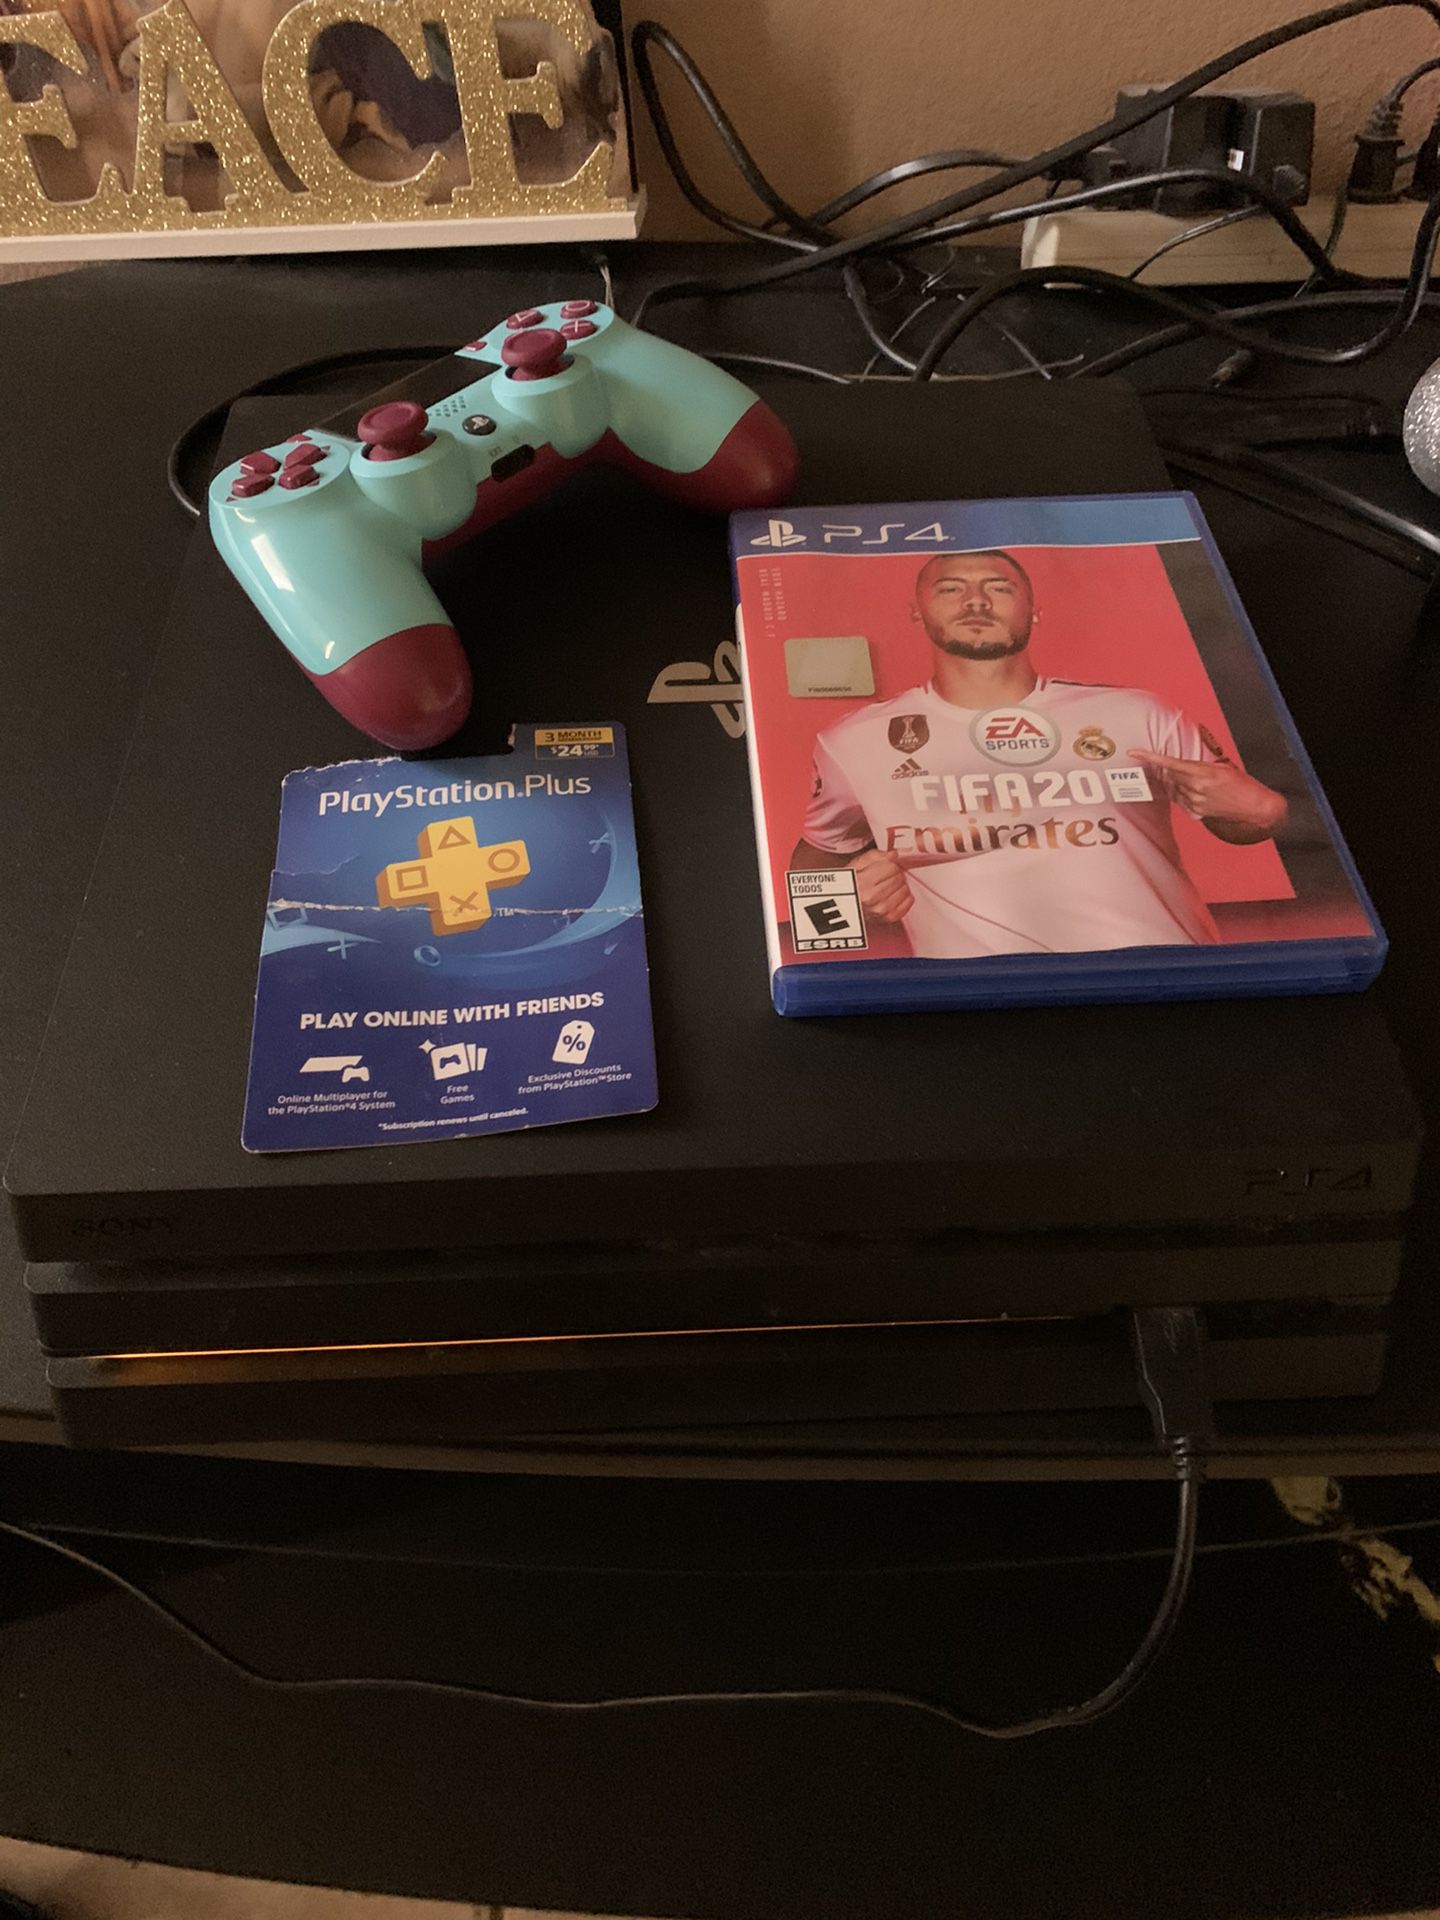 ps4 pro with fifa 20 and 3 month subscription. like new